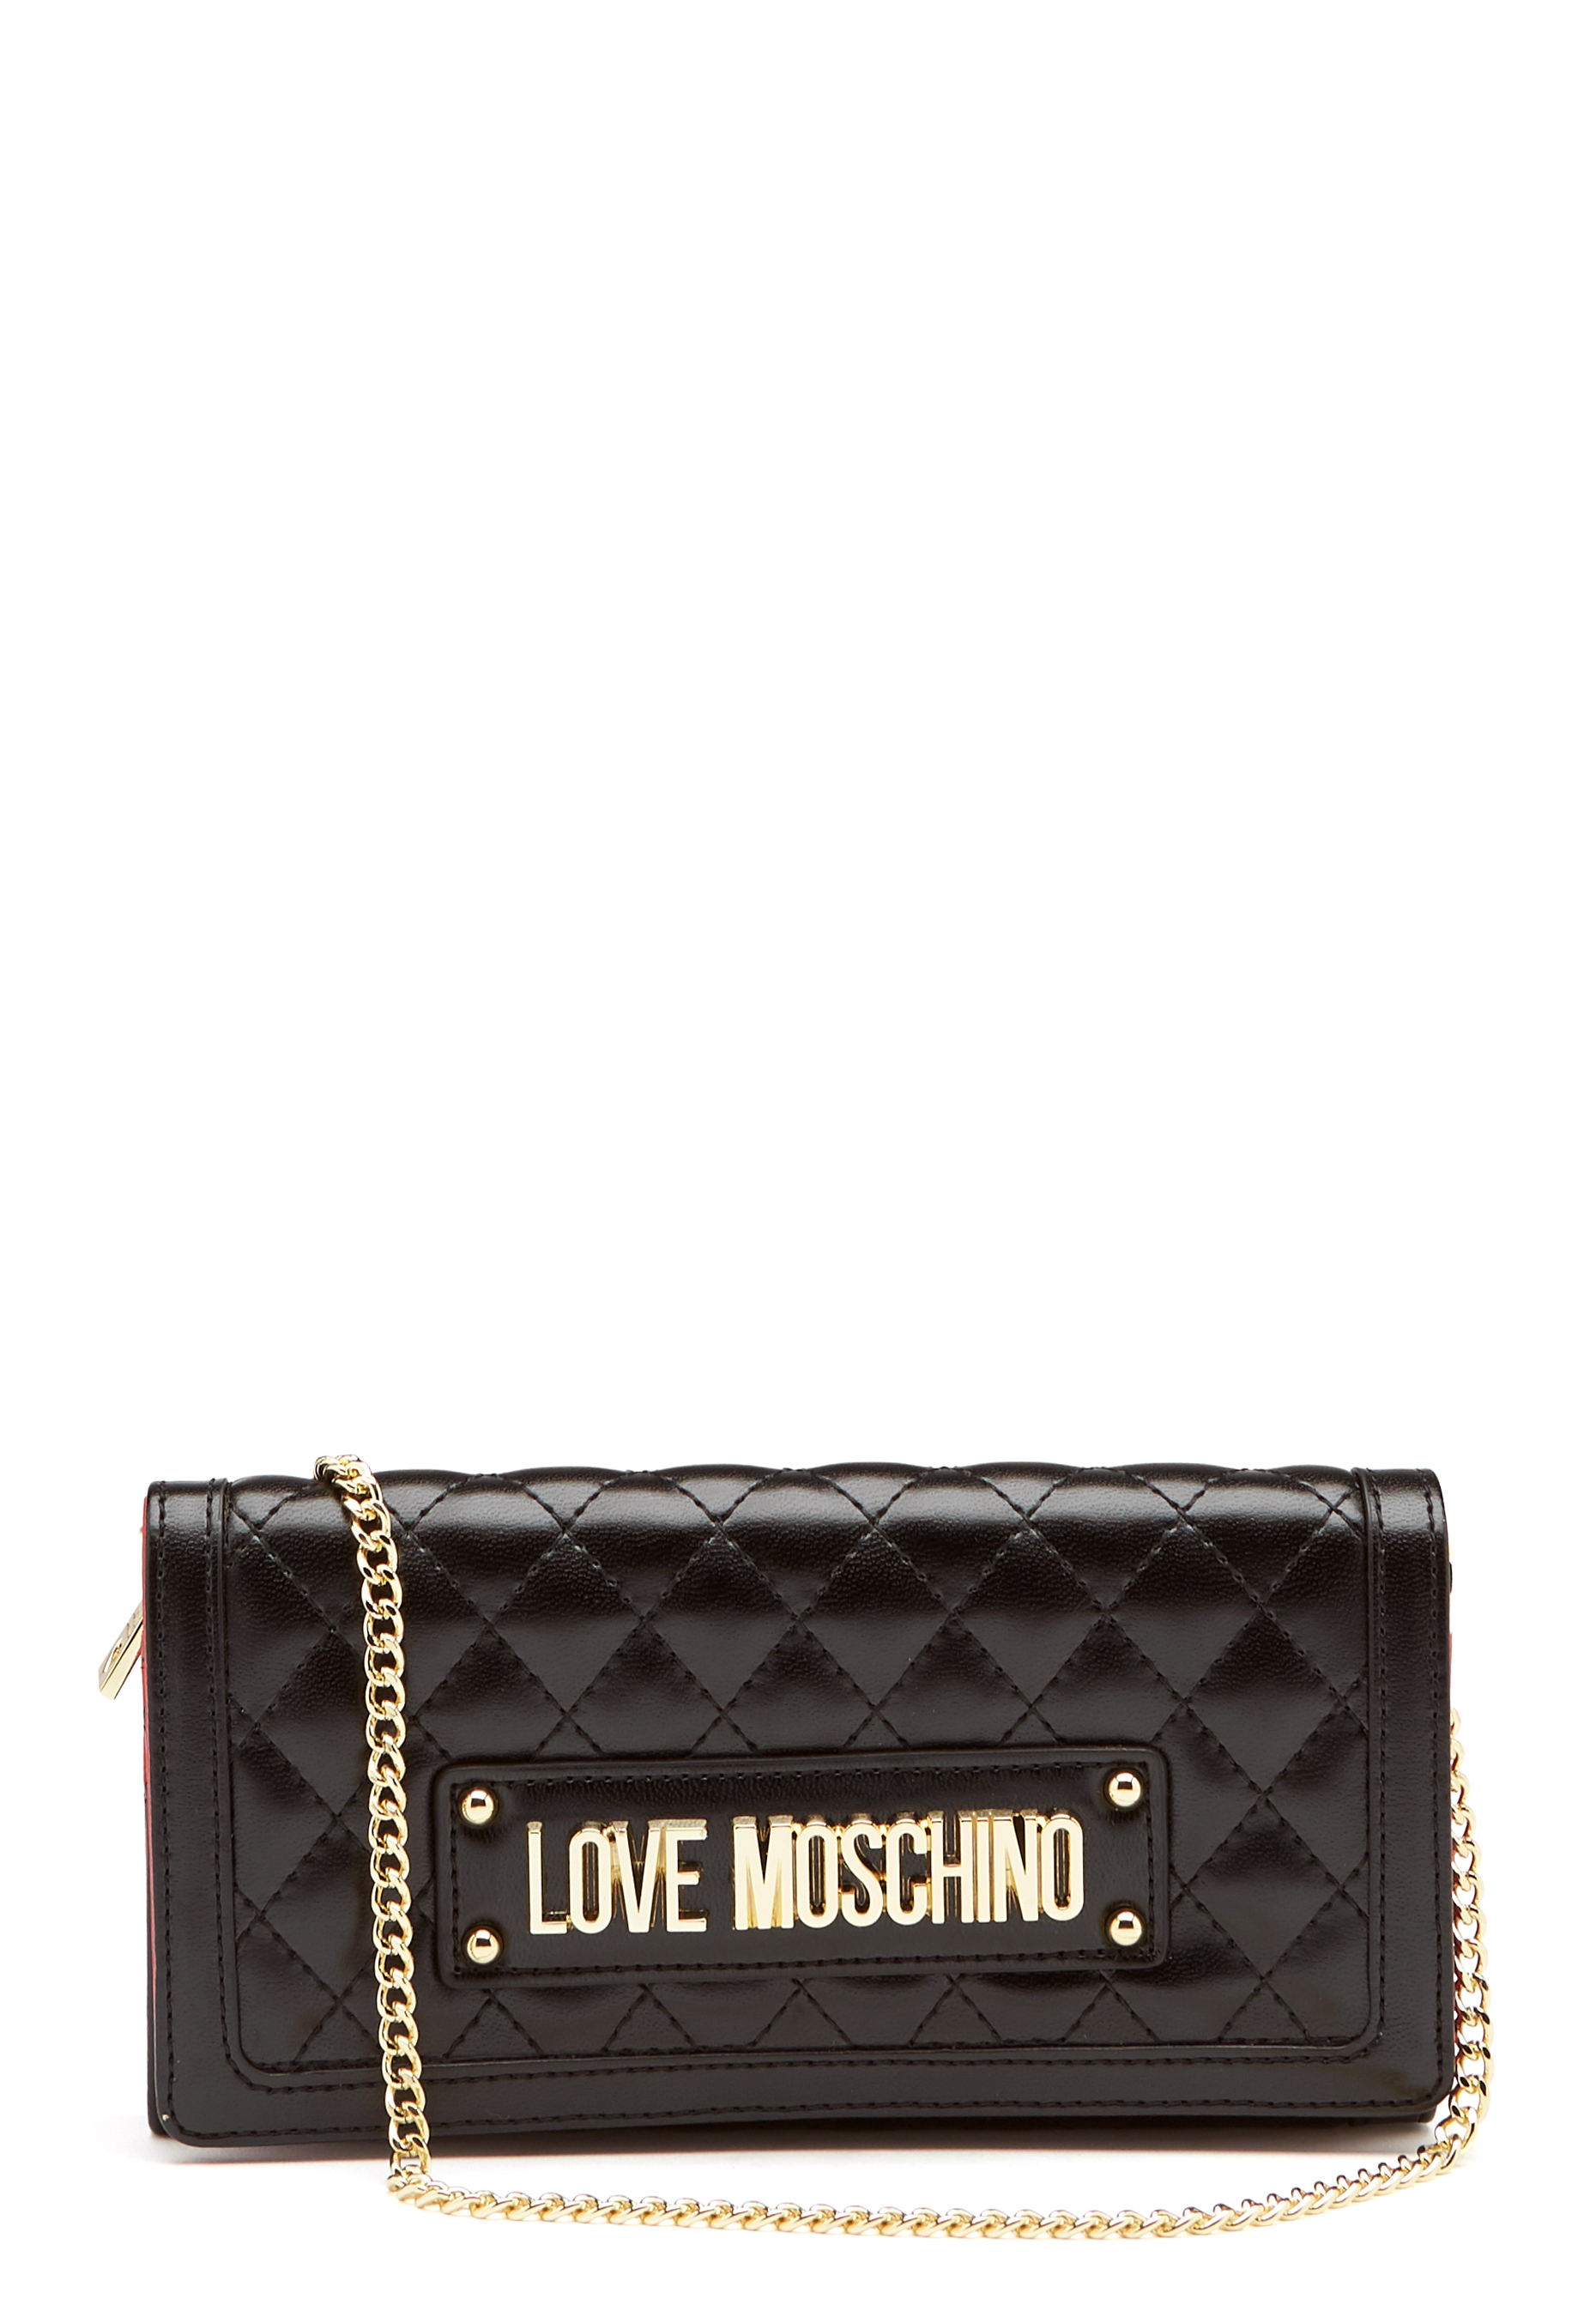 love moschino and moschino difference